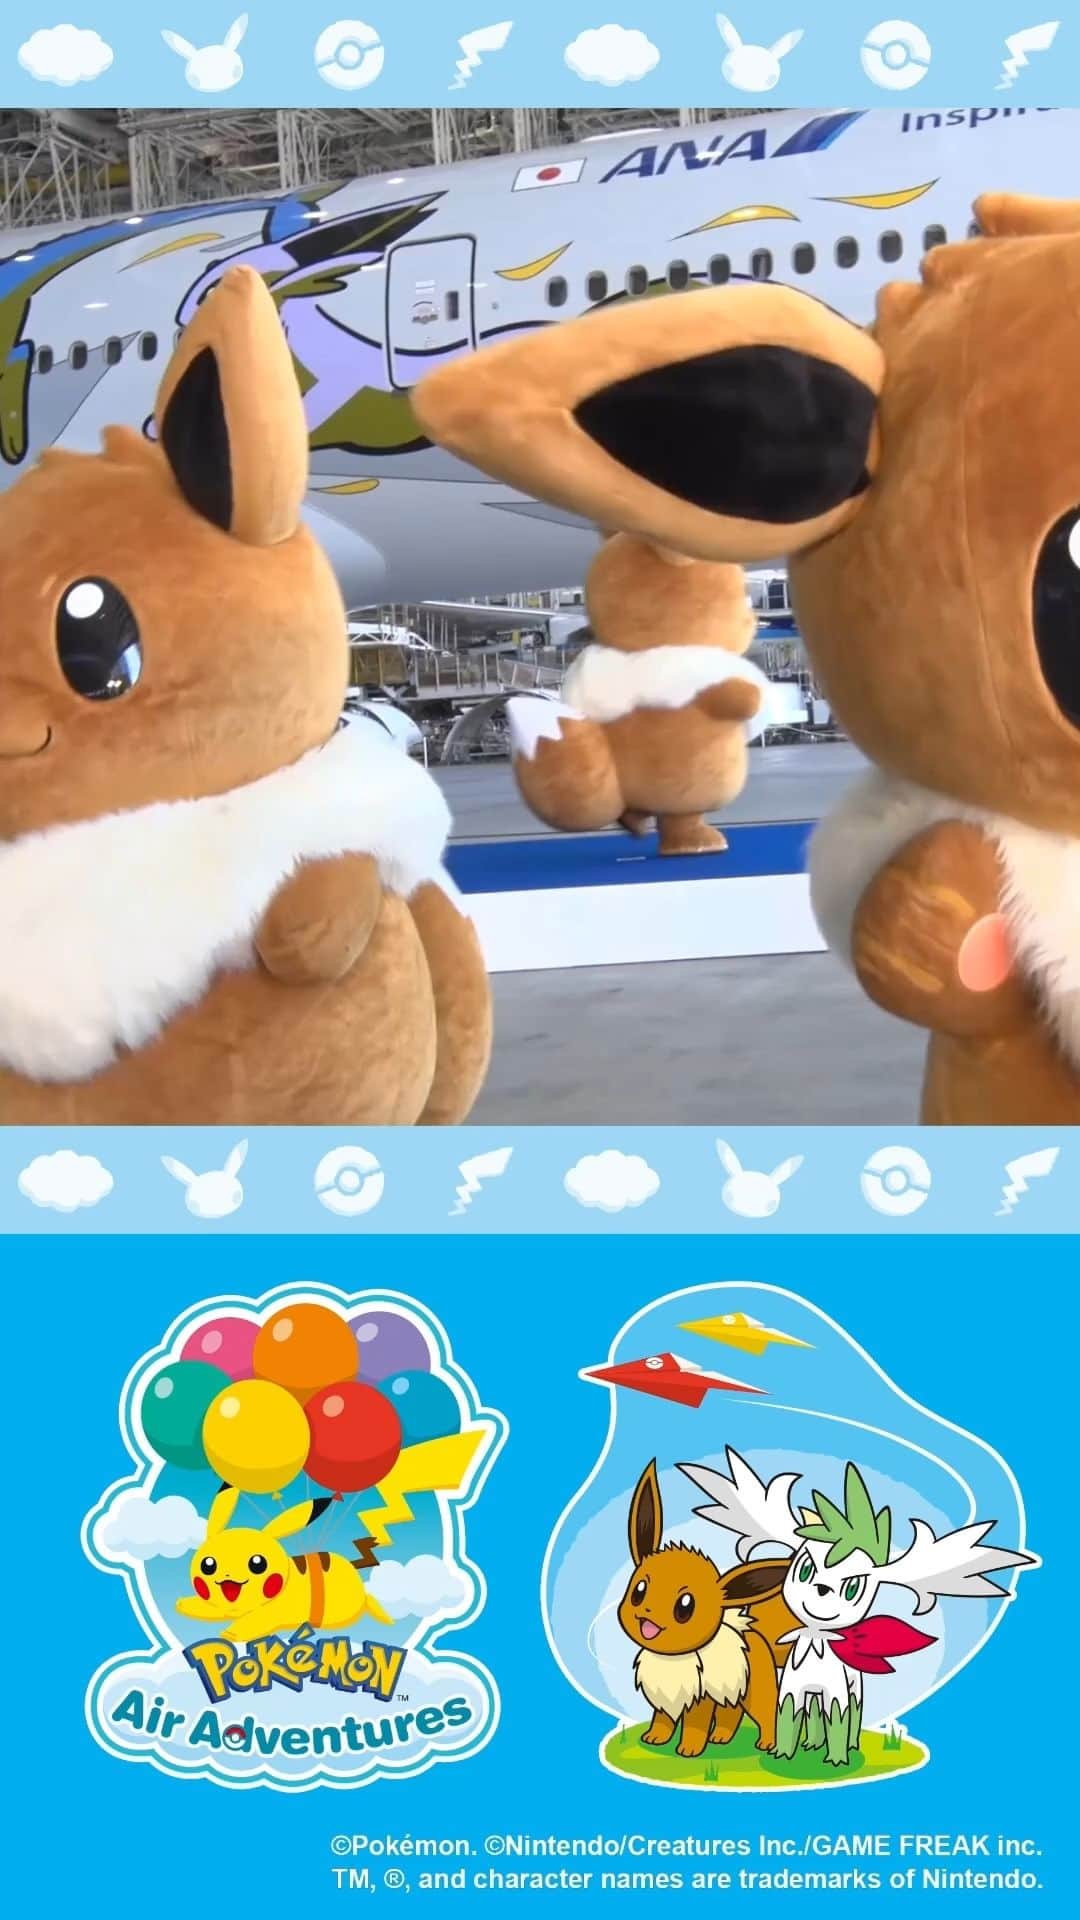 All Nippon Airwaysのインスタグラム：「Another plane launch, another group of adorable dancing Pokémon!  This time it's the Eevee! 😍  Check out their dancing from our EEVEE JET NH launch event in our stories!  #Pokémon #PokémonAirAdventures #PikachuJet #EeveeJet」